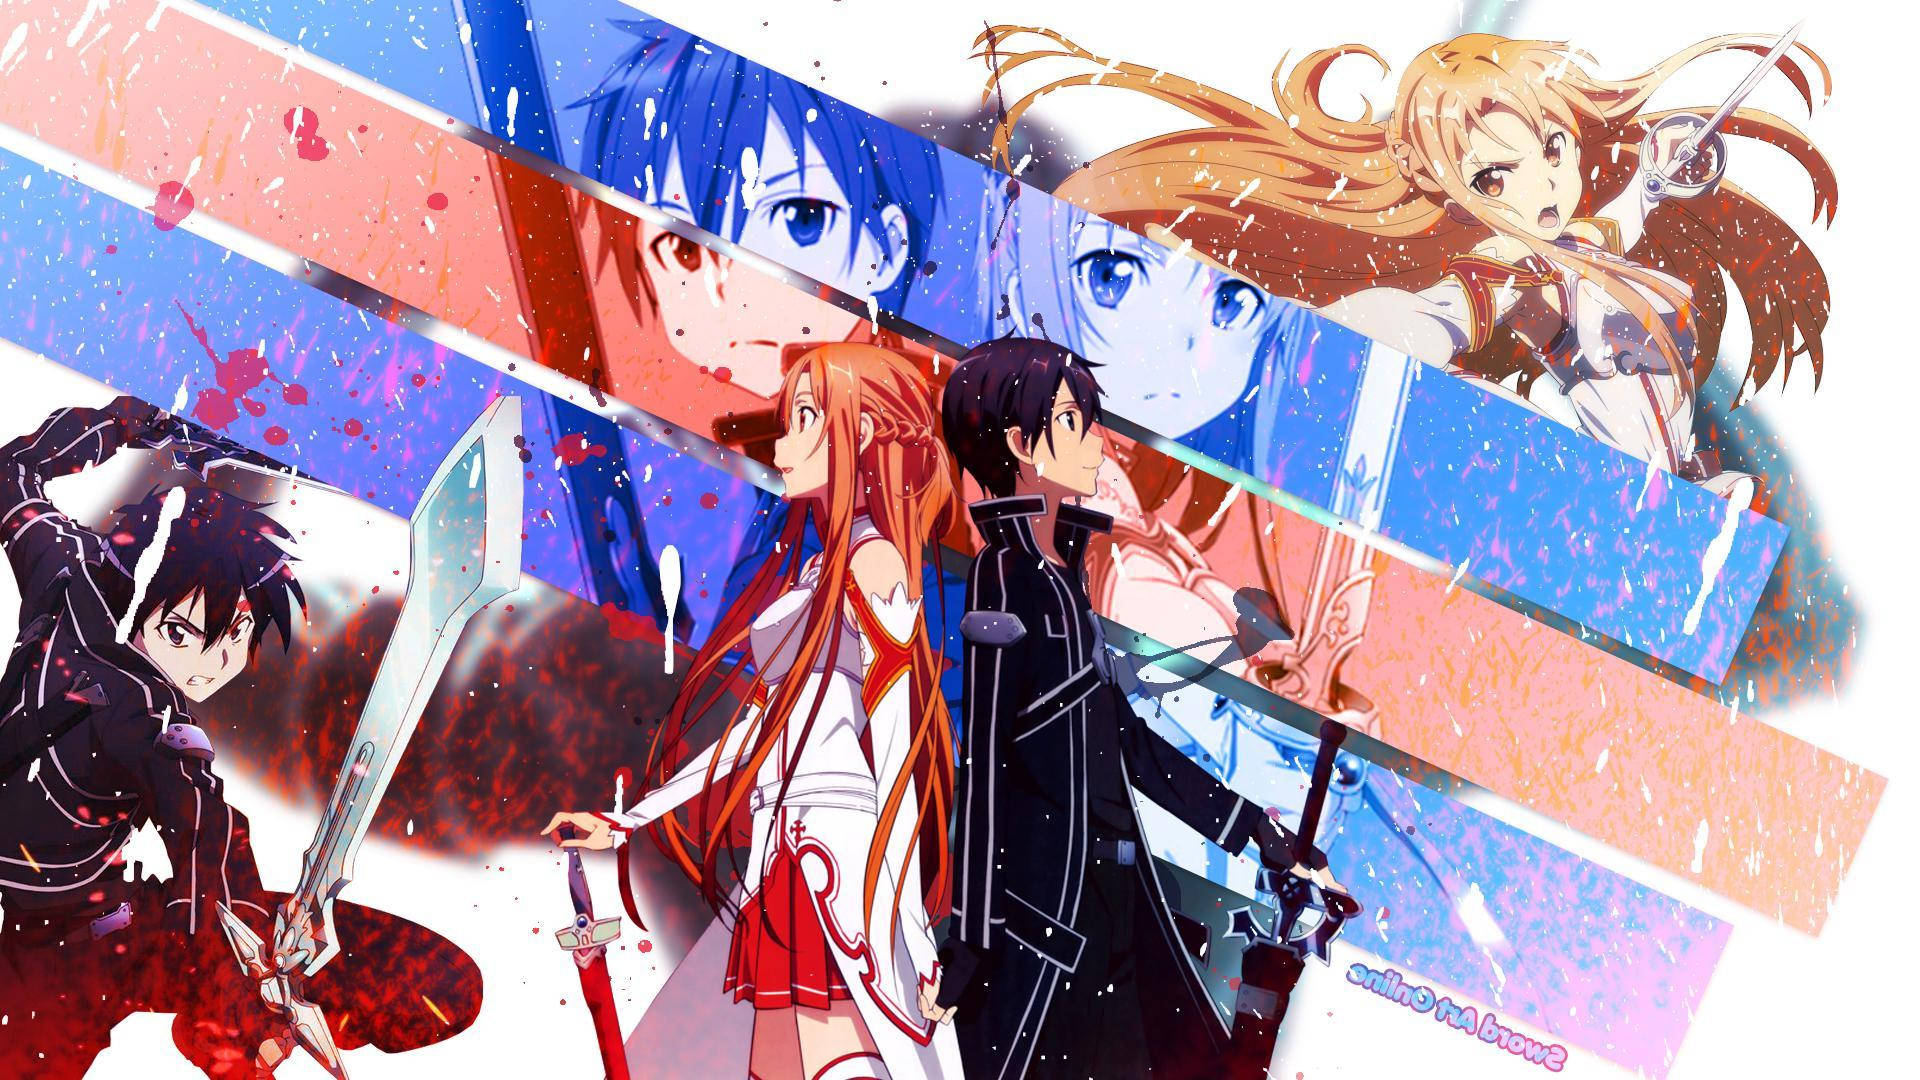 Kirito and Asuna Are Ready to Take on the Next Adventure Wallpaper